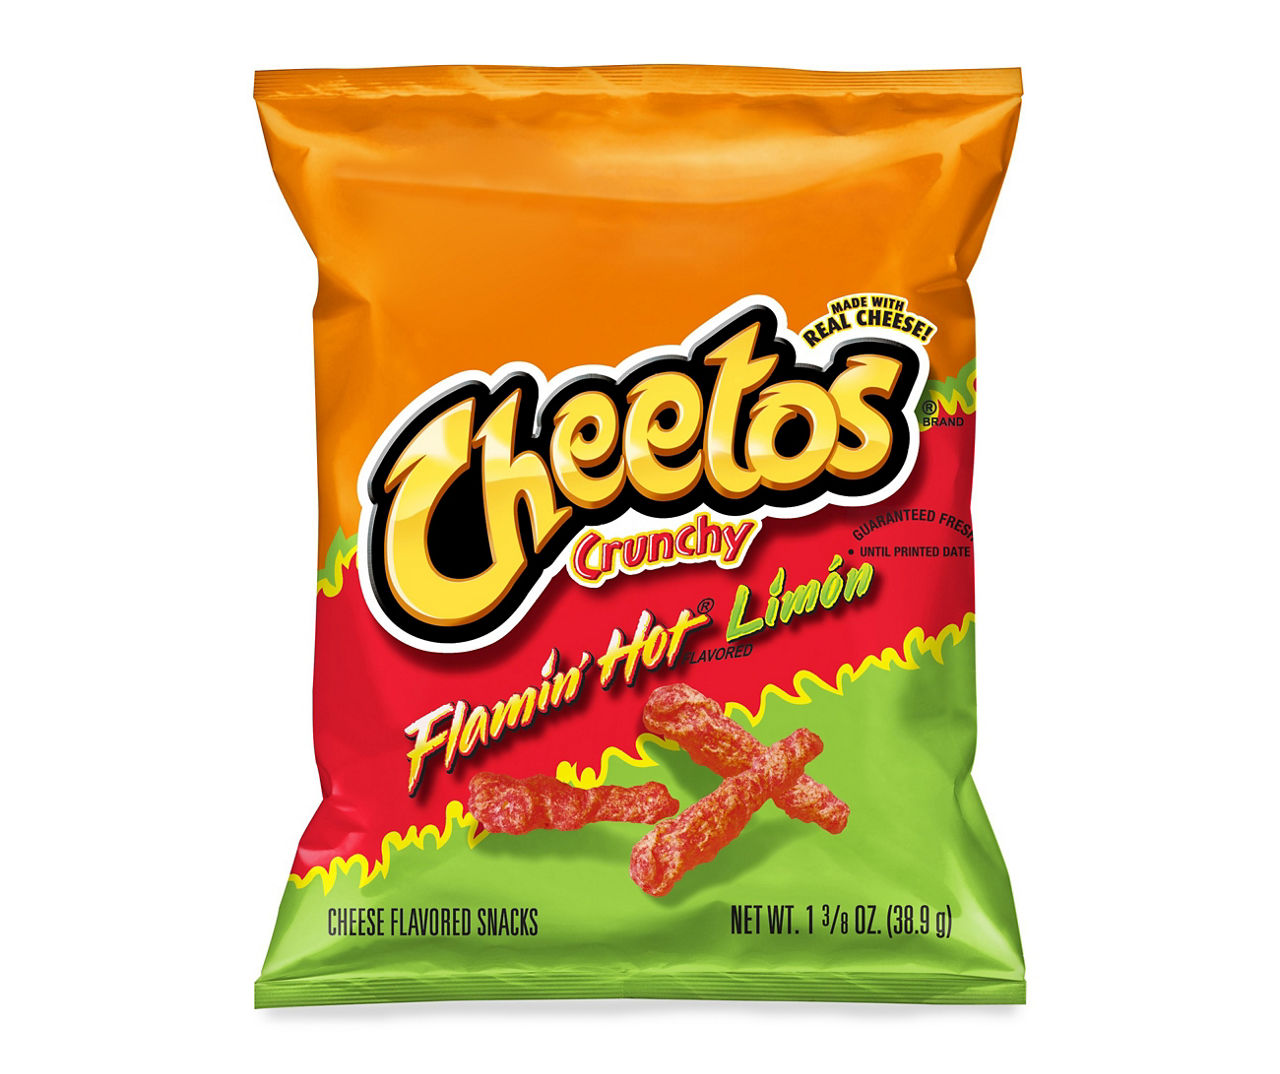 Cheetos Crunchy Cheese Flavored Snack - 15oz : Target